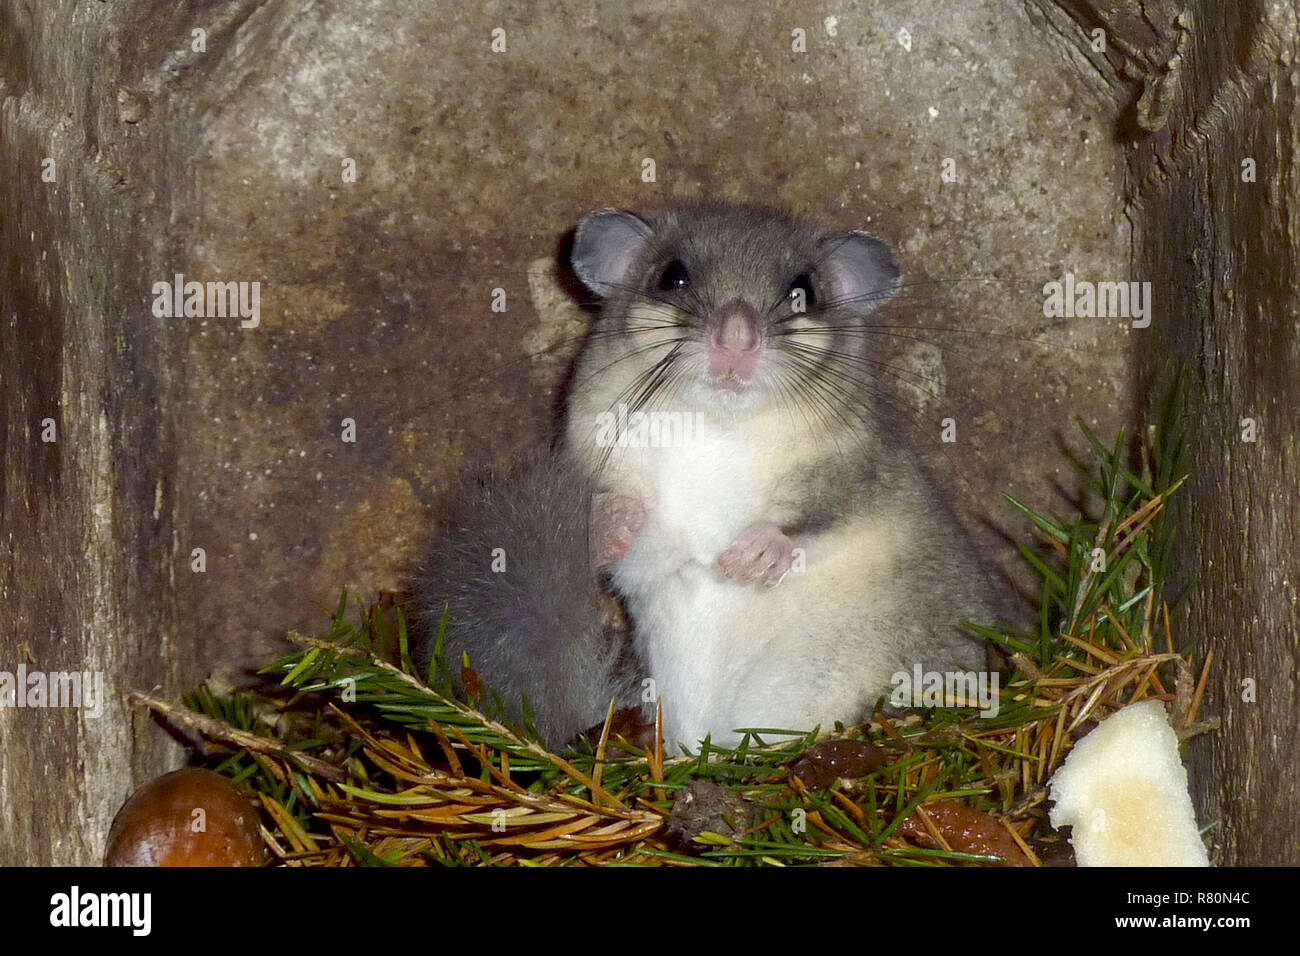 Edible Dormouse (Glis glis). Before leaving the summer quarter, dormice eat as much as possible to create fat reserves for hibernation. This animal has a lot of fat. Germany Stock Photo